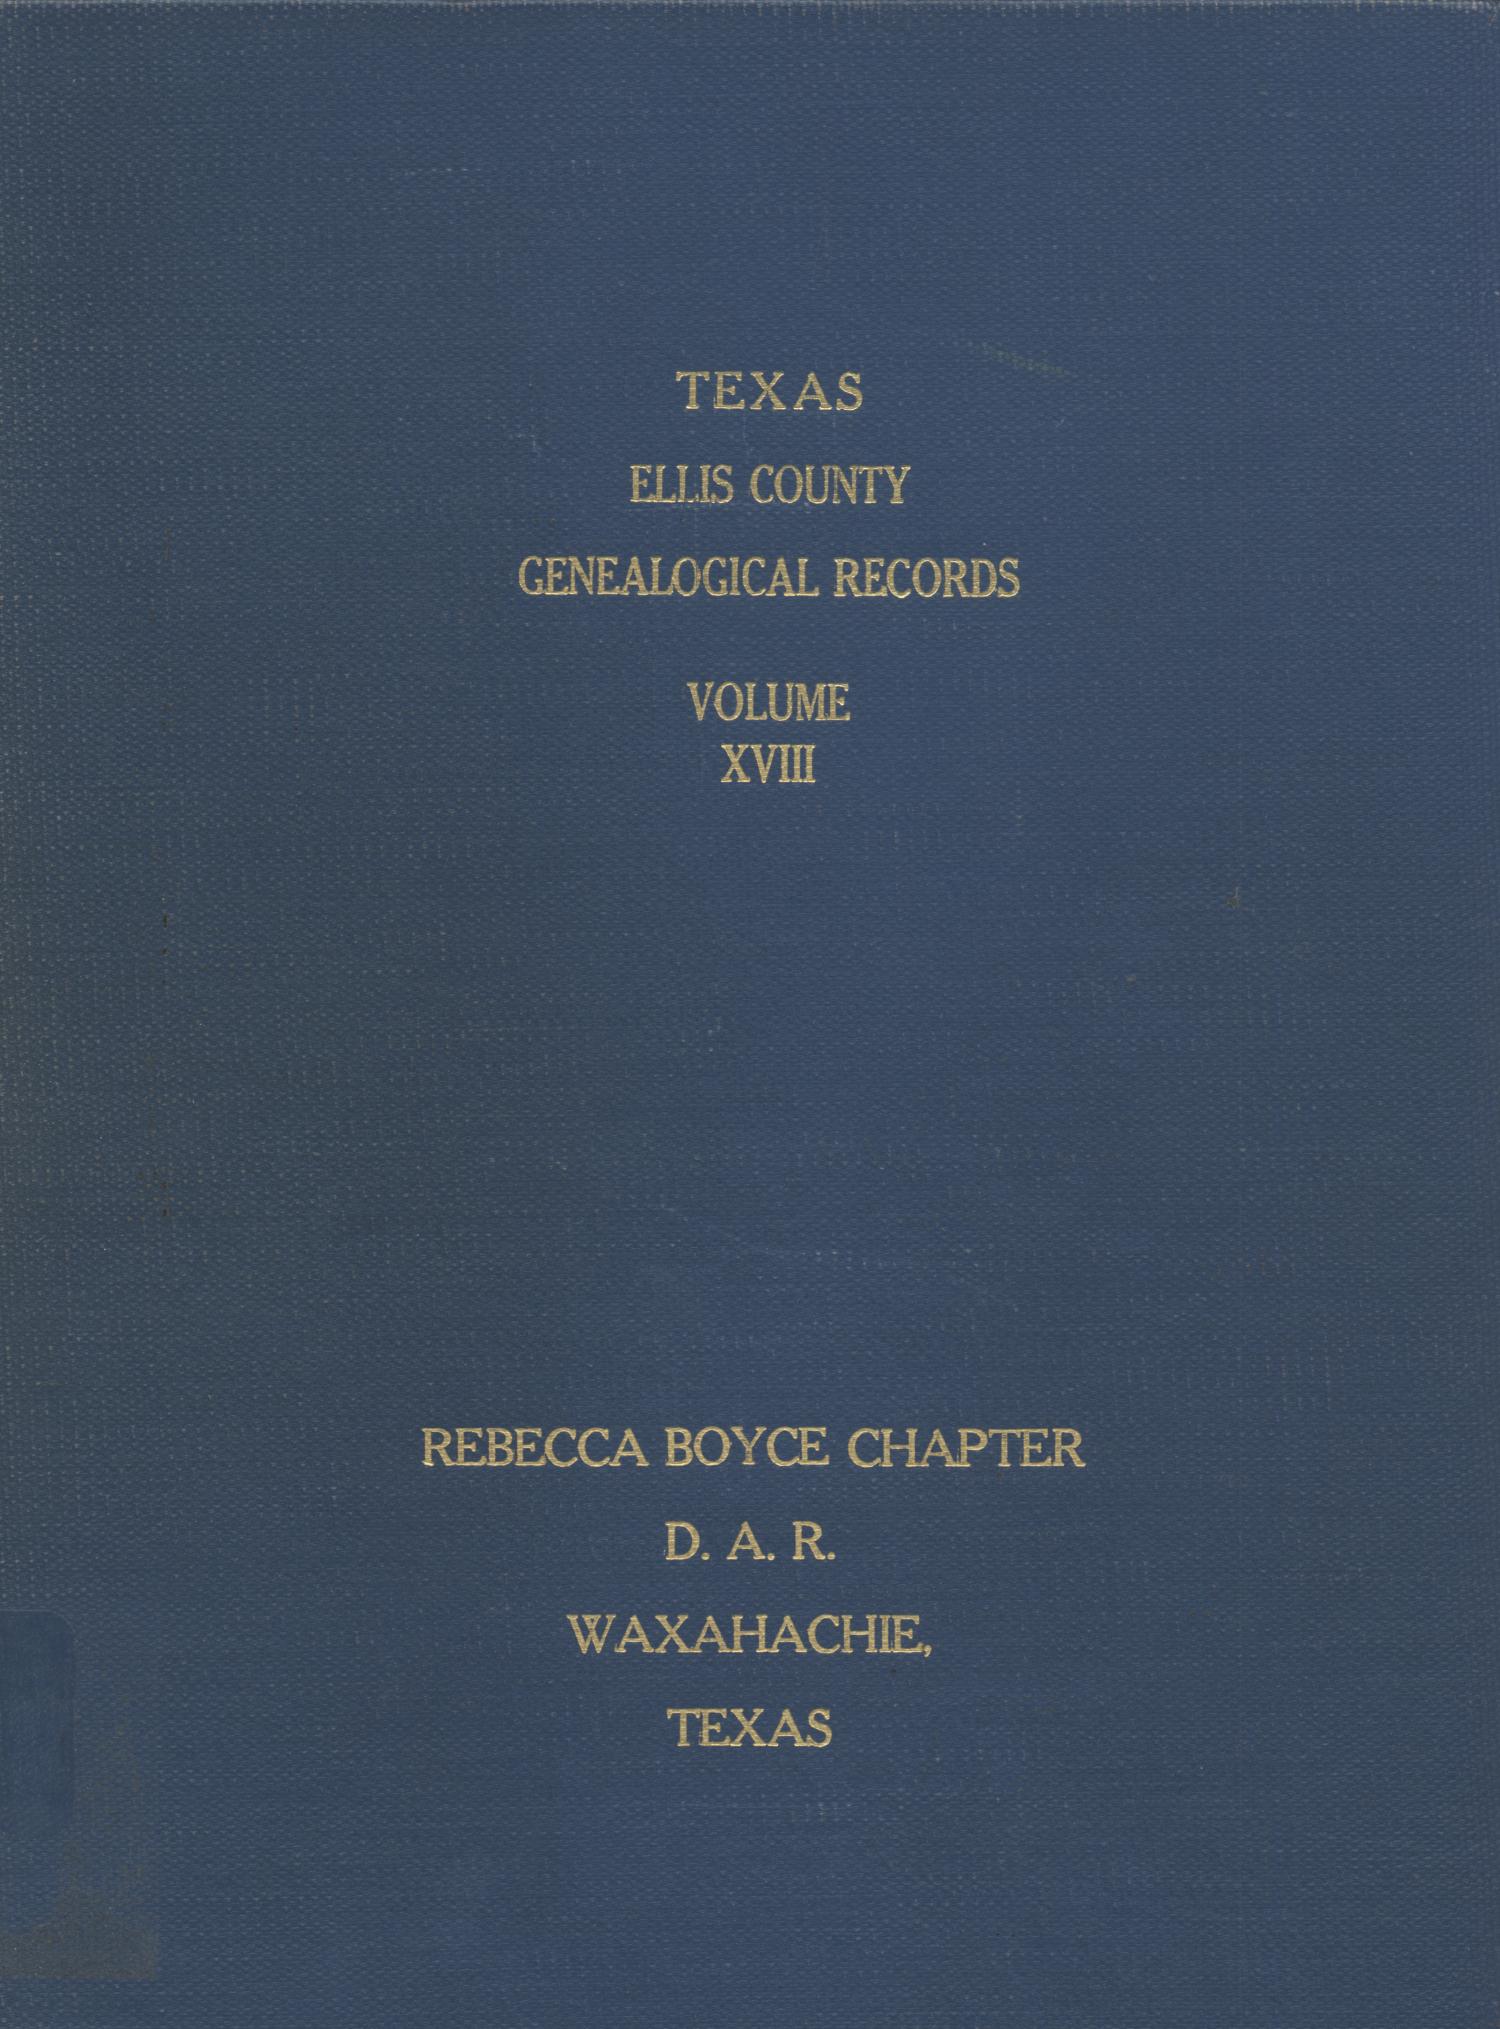 Texas Genealogical Records, Ellis County, Volume 18
                                                
                                                    Front Cover
                                                